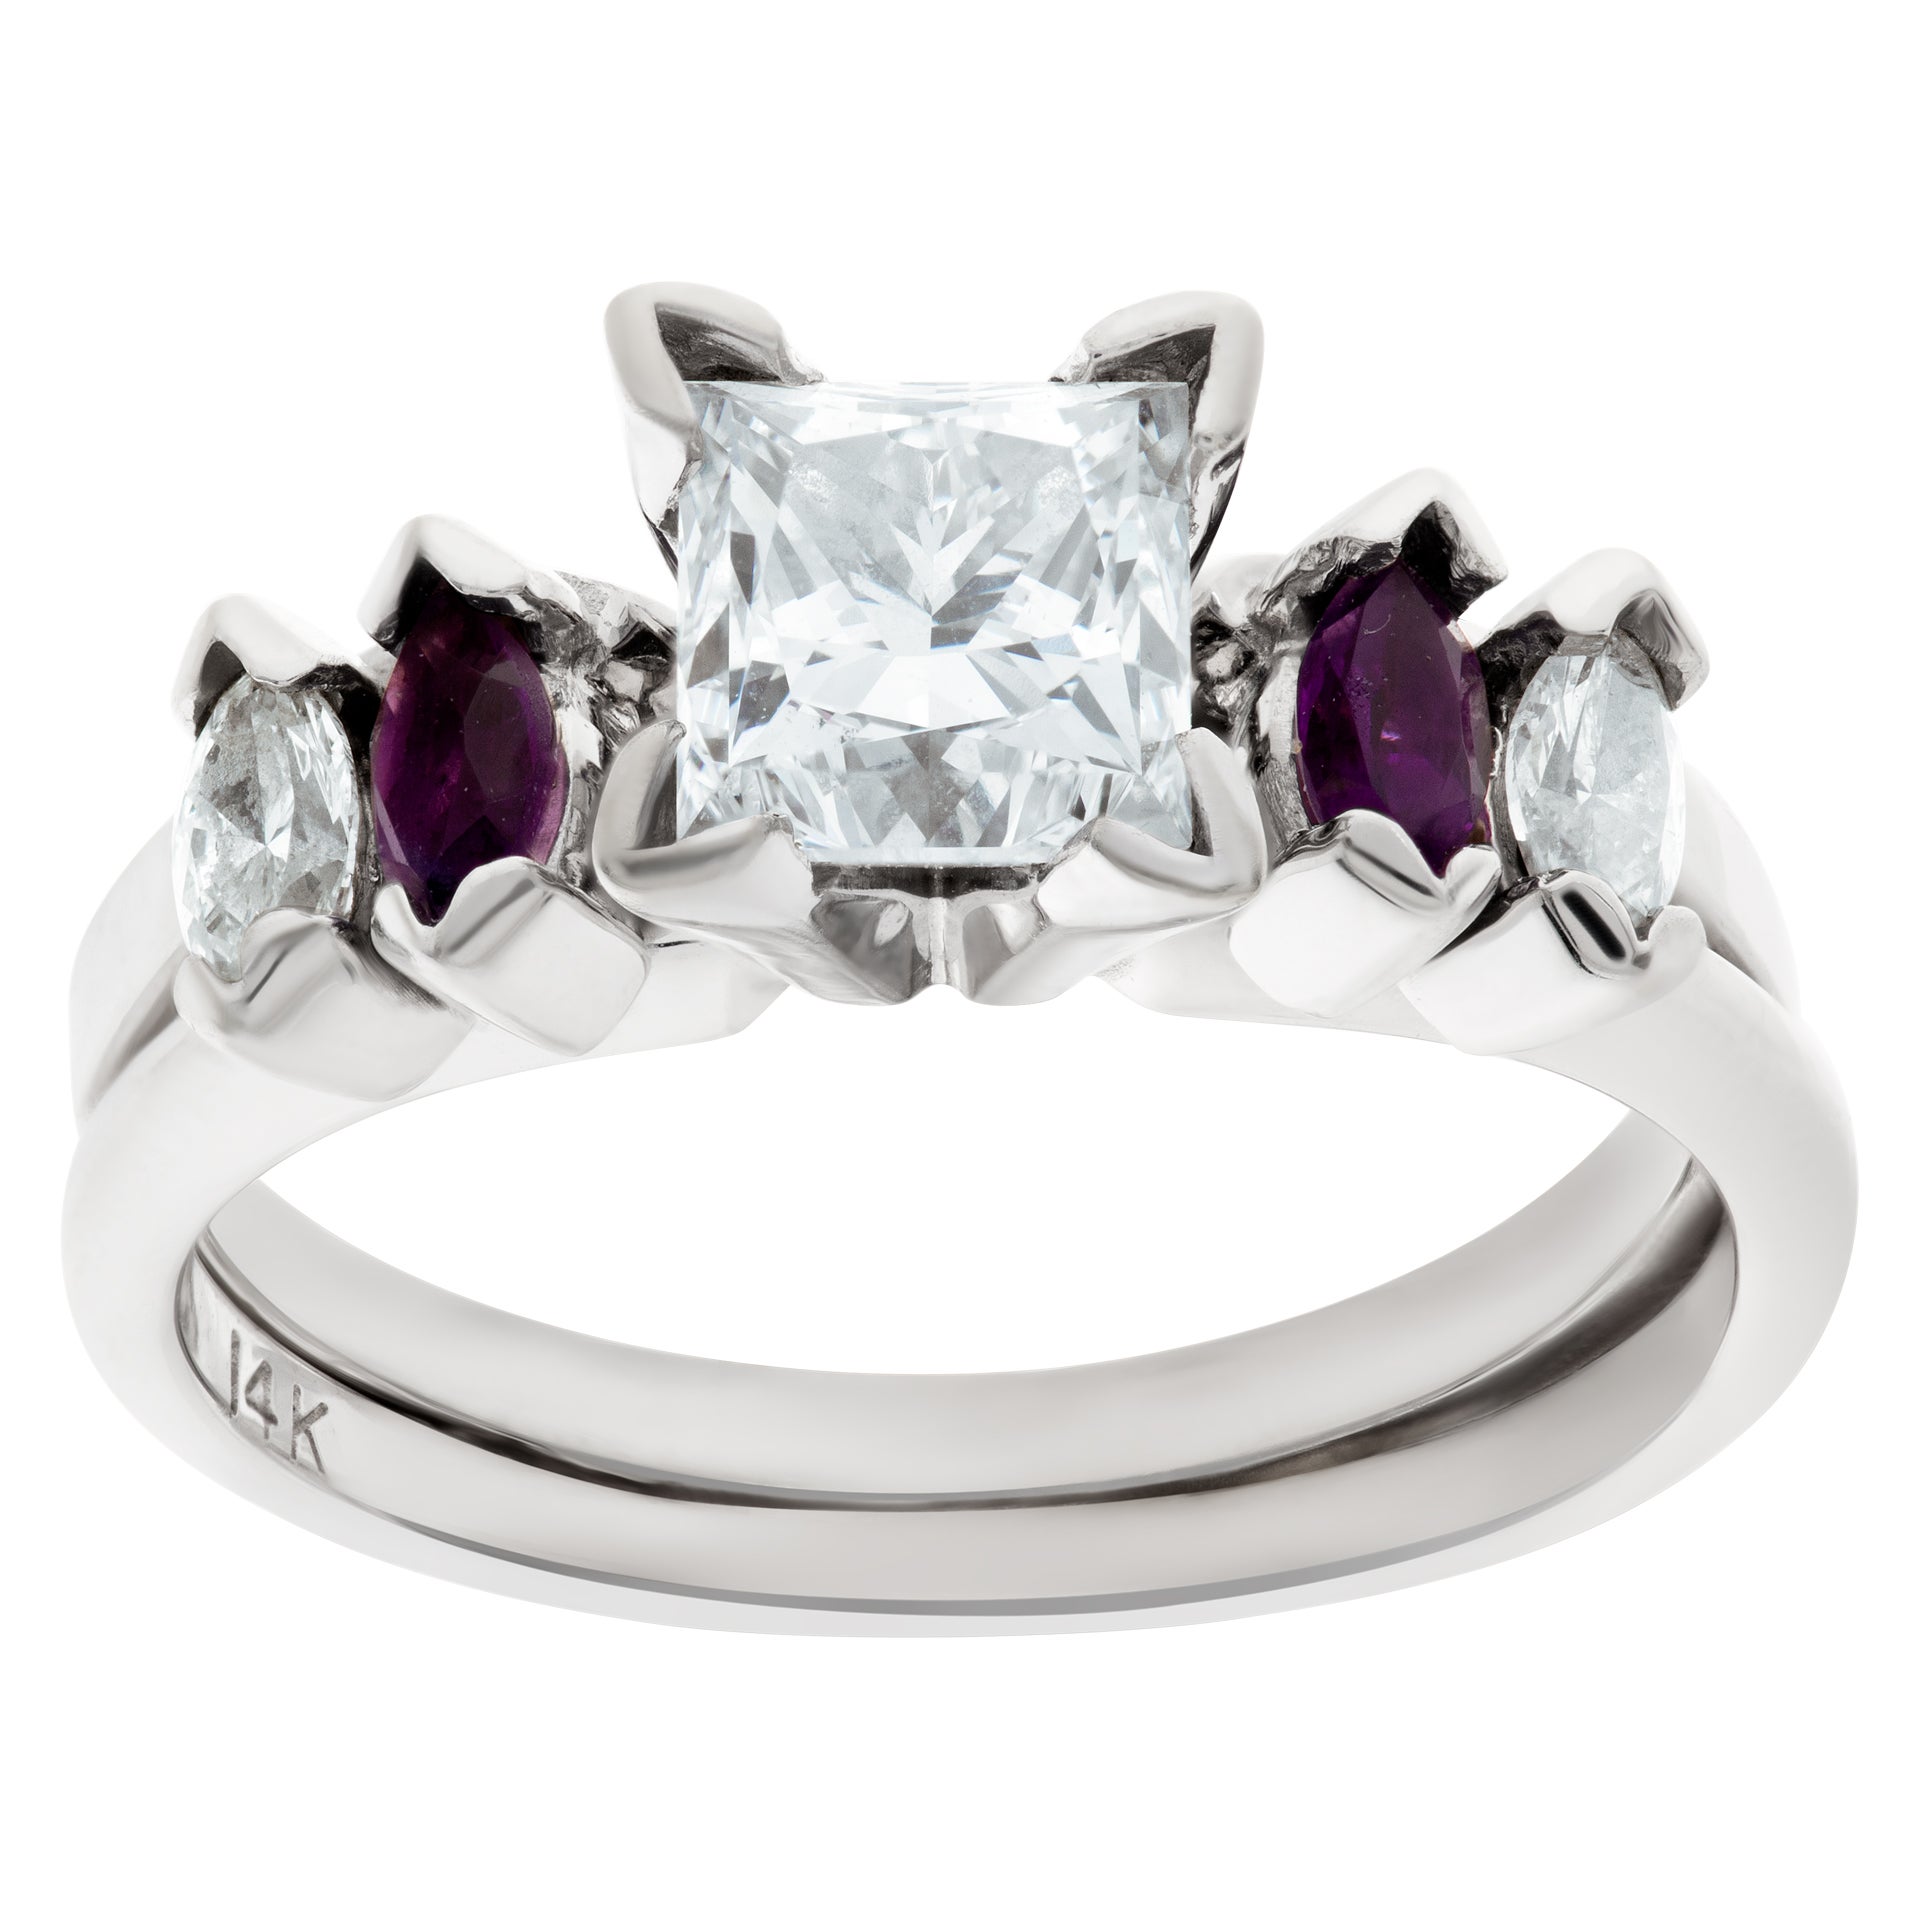 Ring Set in 14k White Gold with Diamond and Amythest Accents, GIA Certified